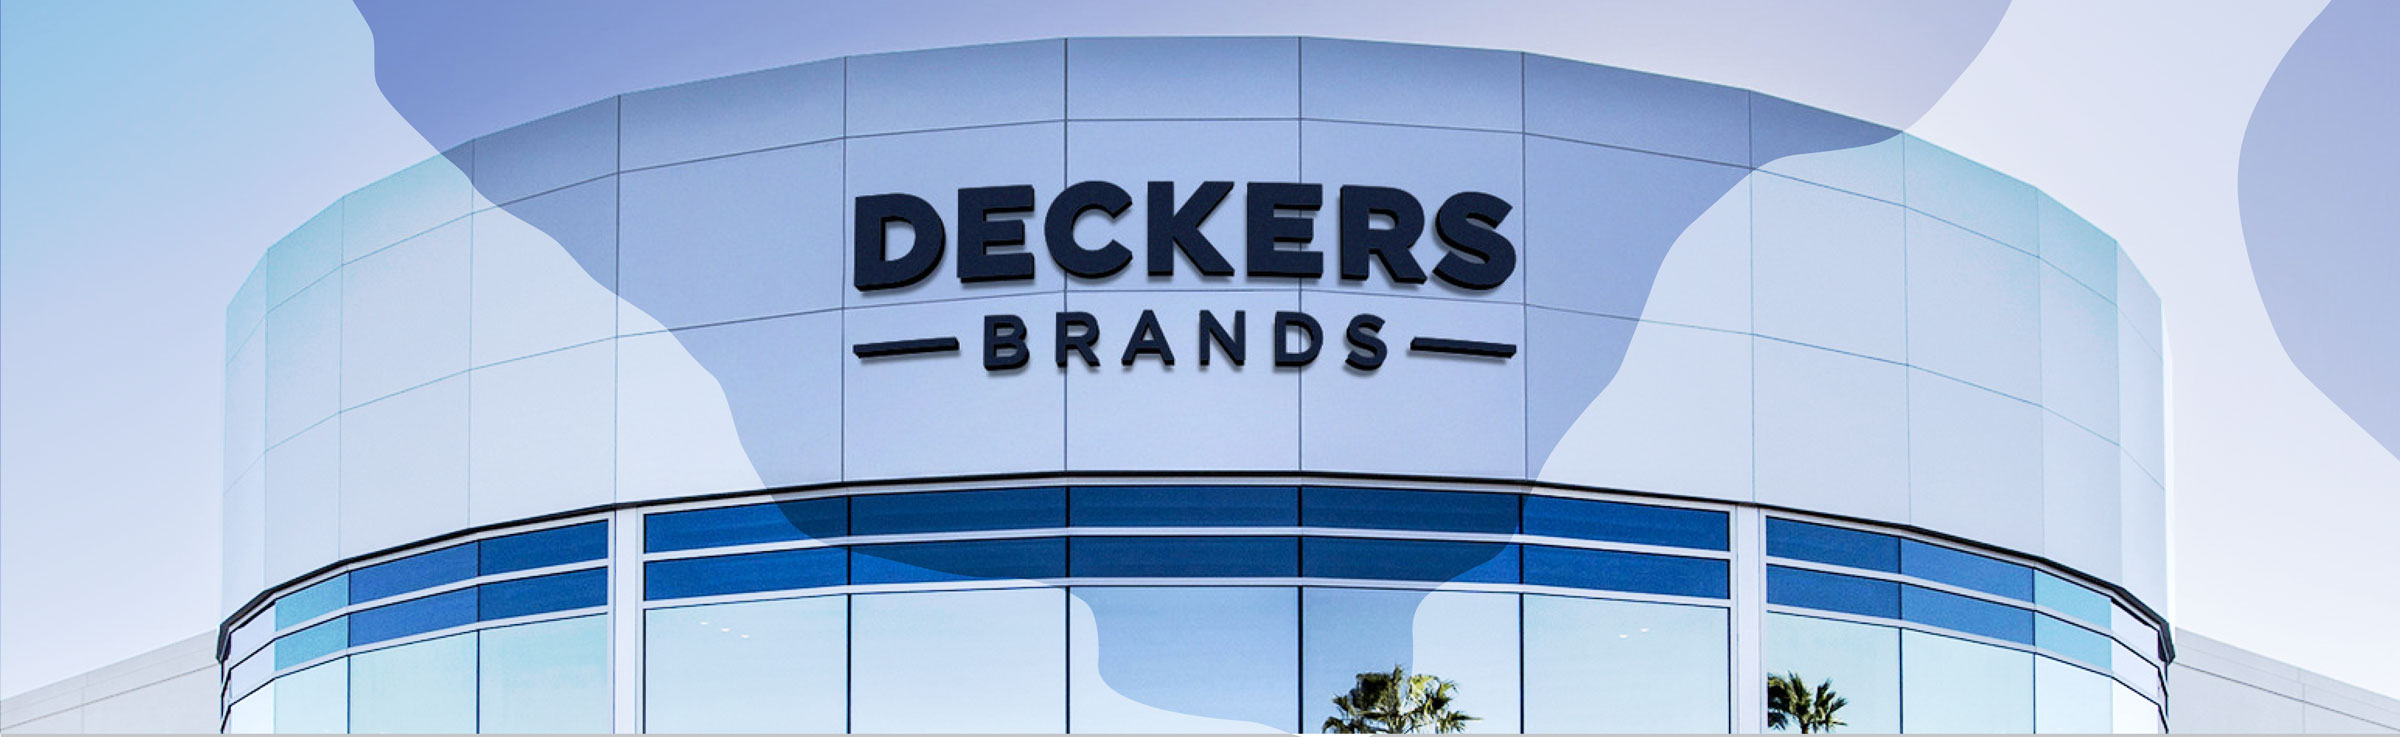 Deckers headquarters building and logo sign